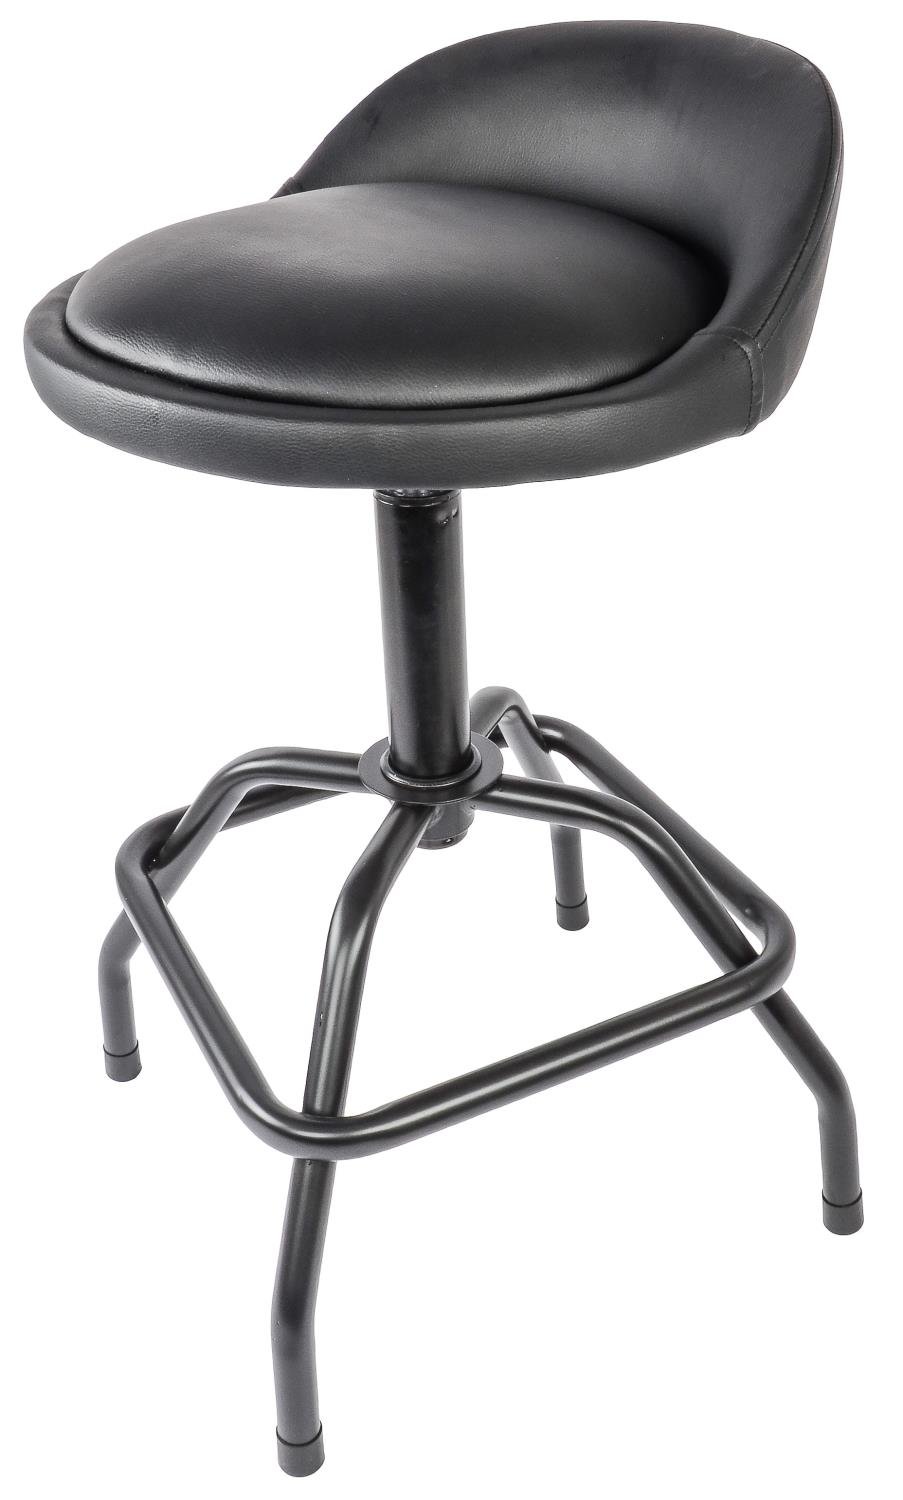 W85011 Pneumatic Swivel Stool Adjustable from 26 in. to 32 in. [330 lb. Weight Capacity]